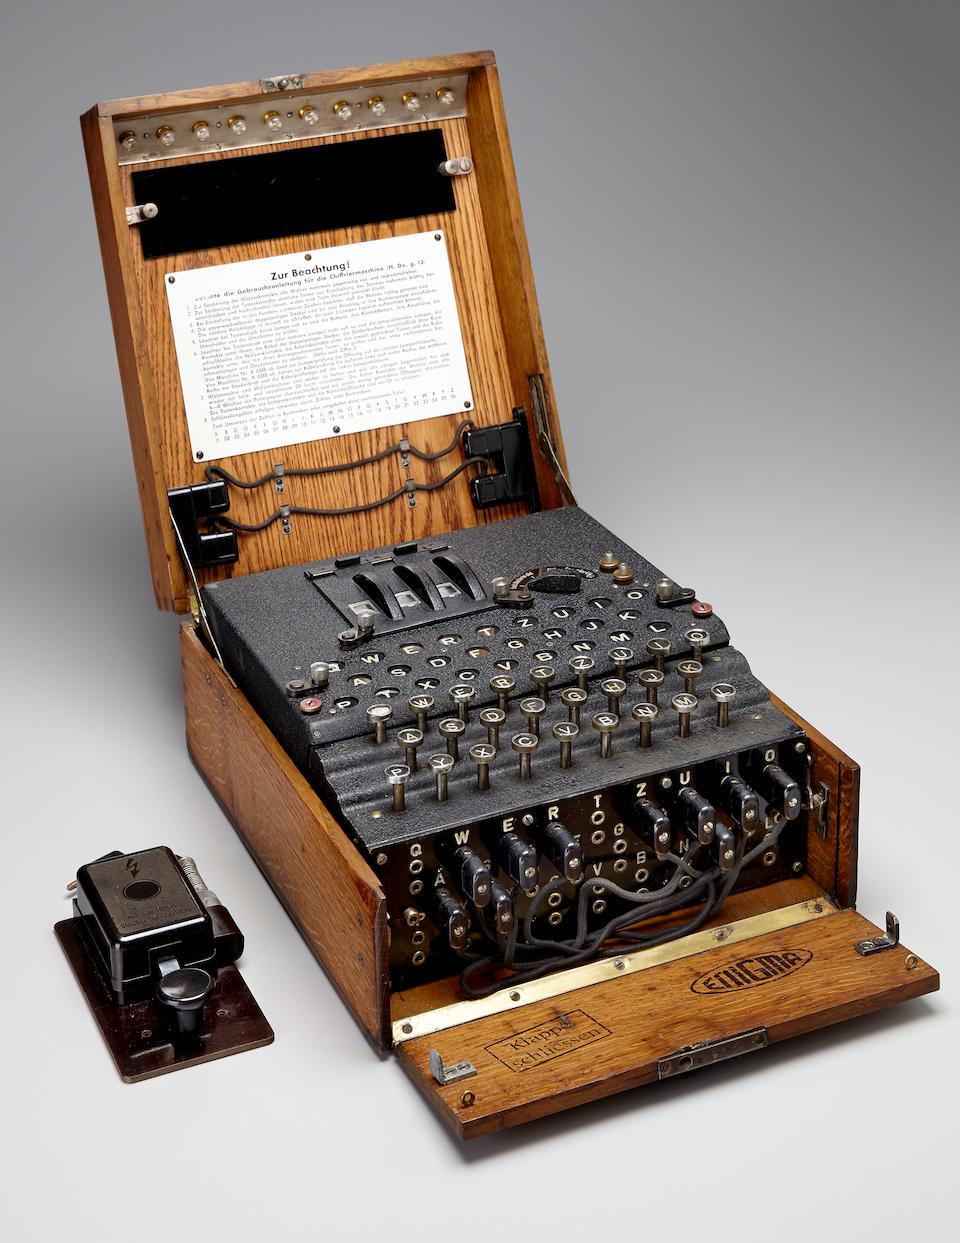 Enigma I machine. A Rare 3-rotor German Enigma I Enciphering Machine, Modell 1, for Heer (Army) use, Berlin, 1943.